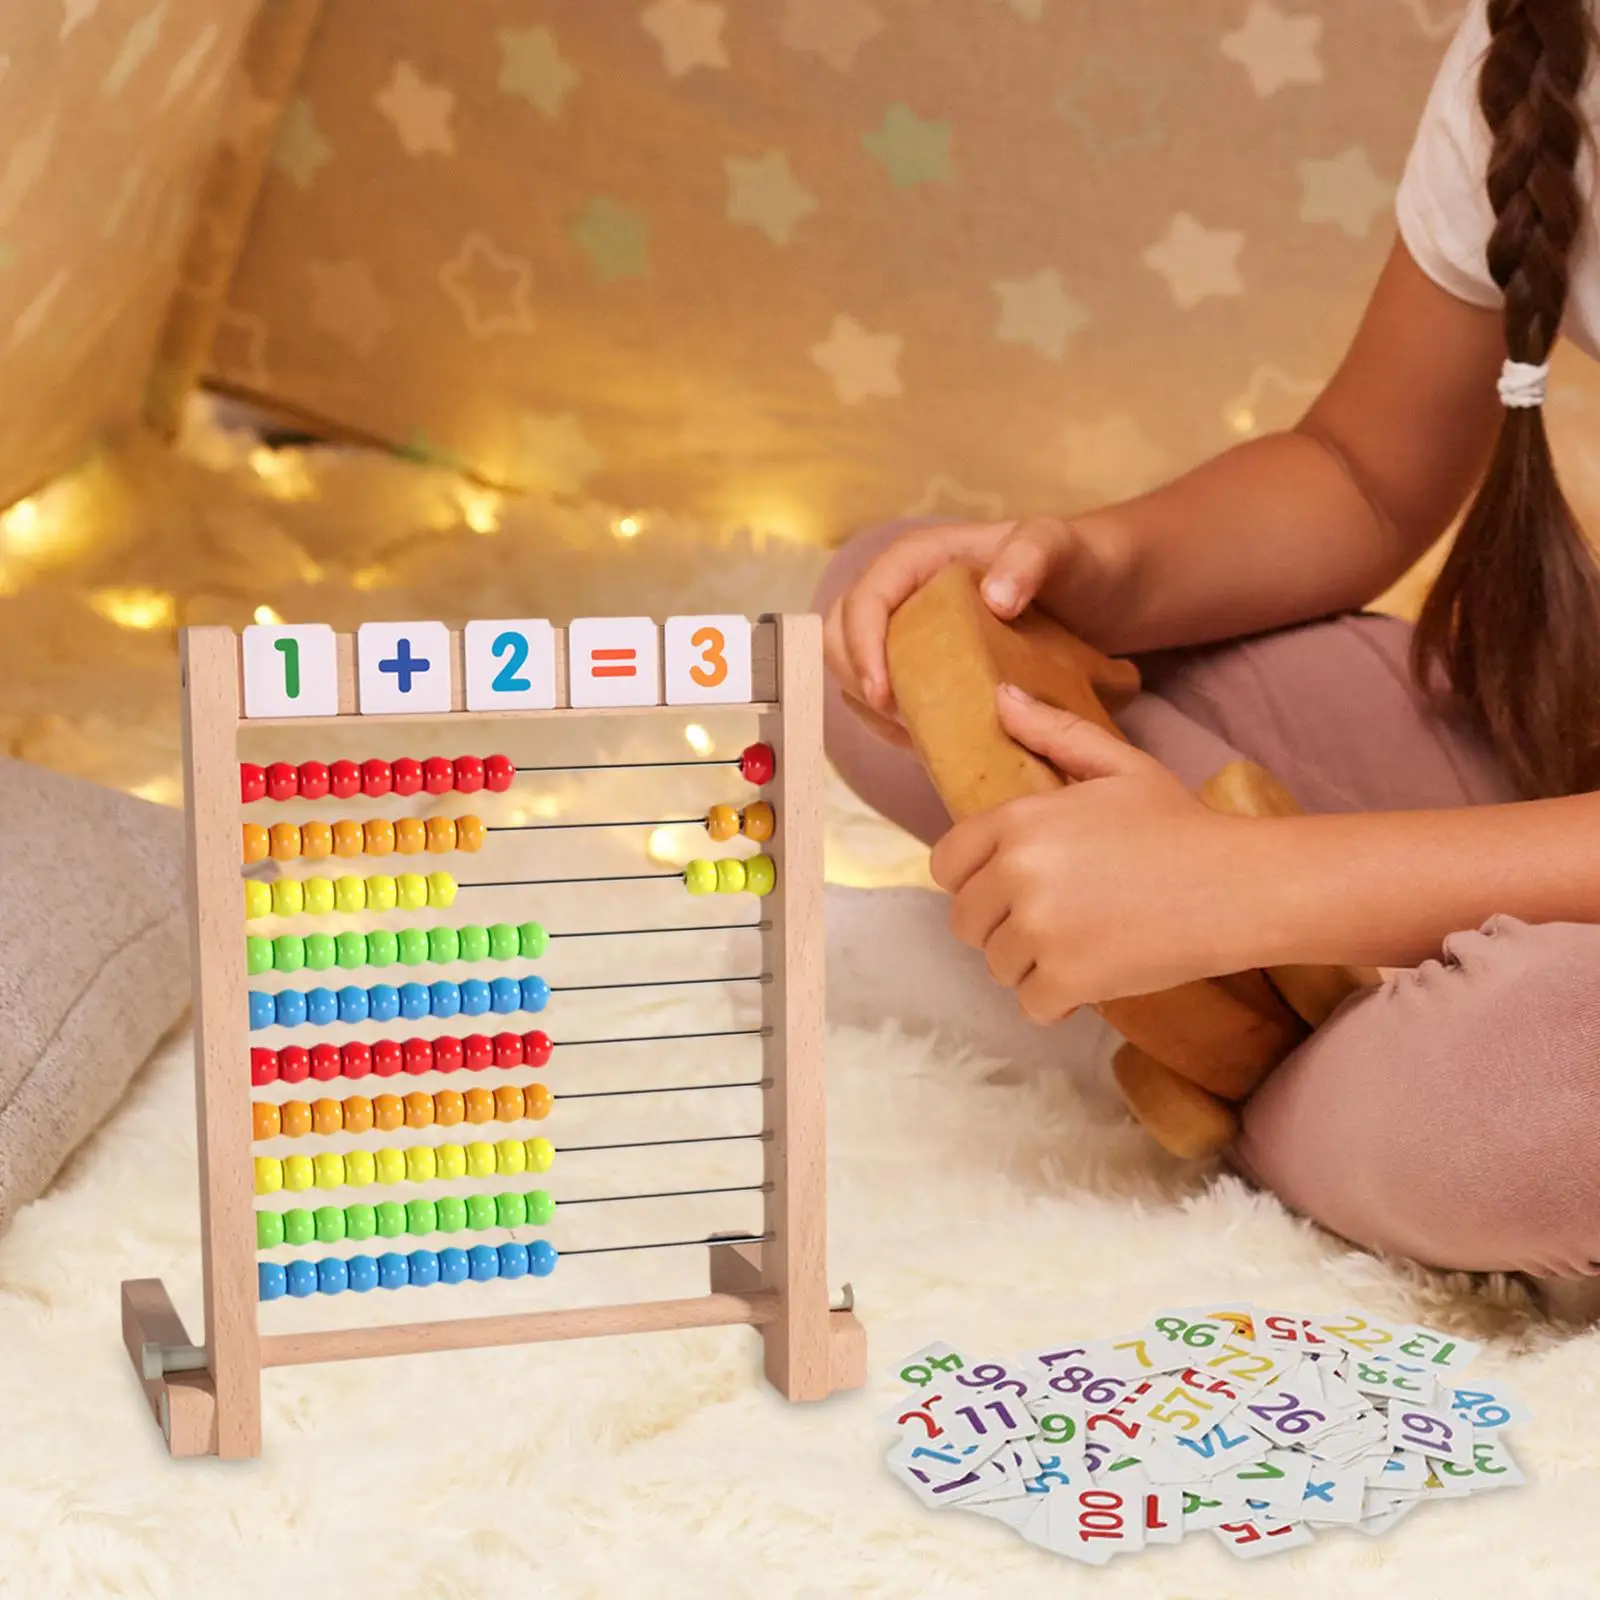 Add Subtract Abacus Ten Frame Set Educational Counting Frames Toy Montessori for Boy Girls Toddlers Kindergarten Children Gifts